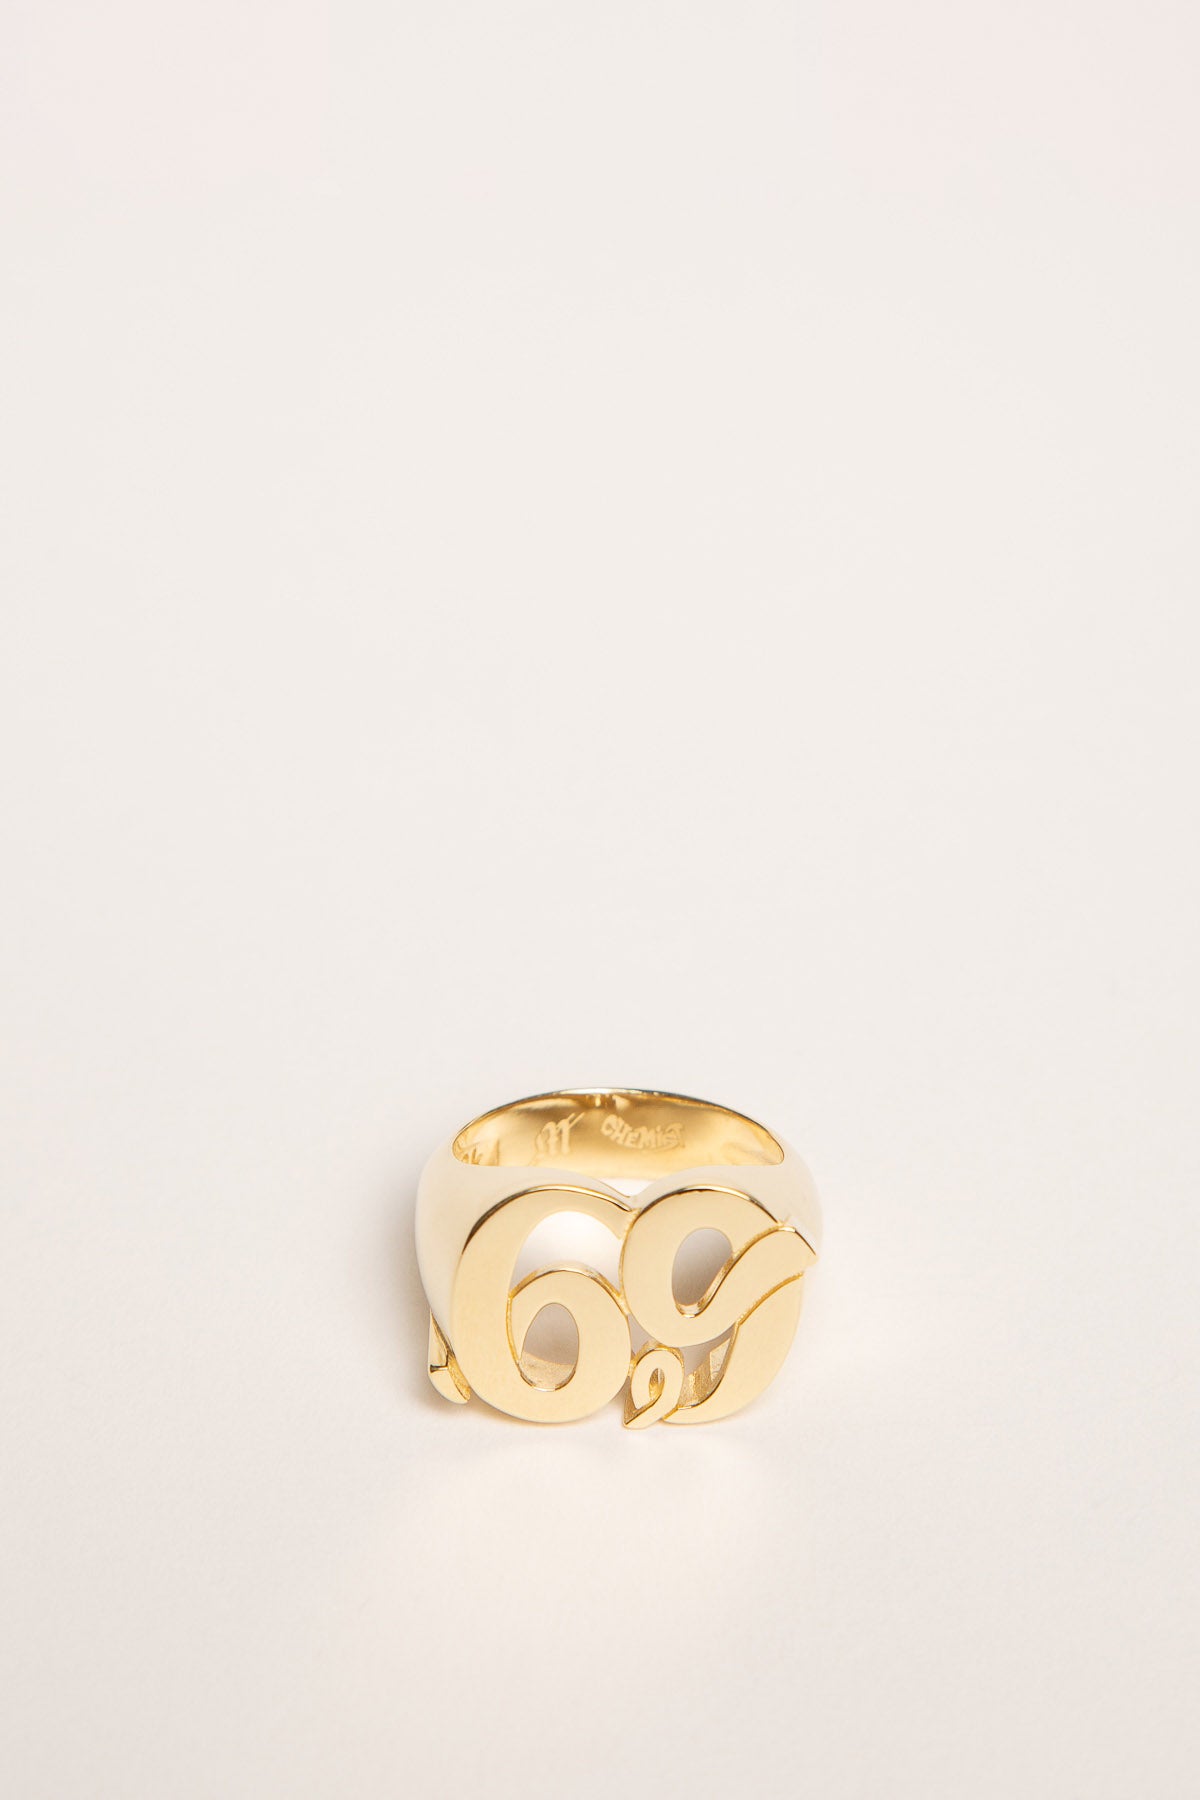 CHEMIST | YELLOW GOLD L FACE 69 RING